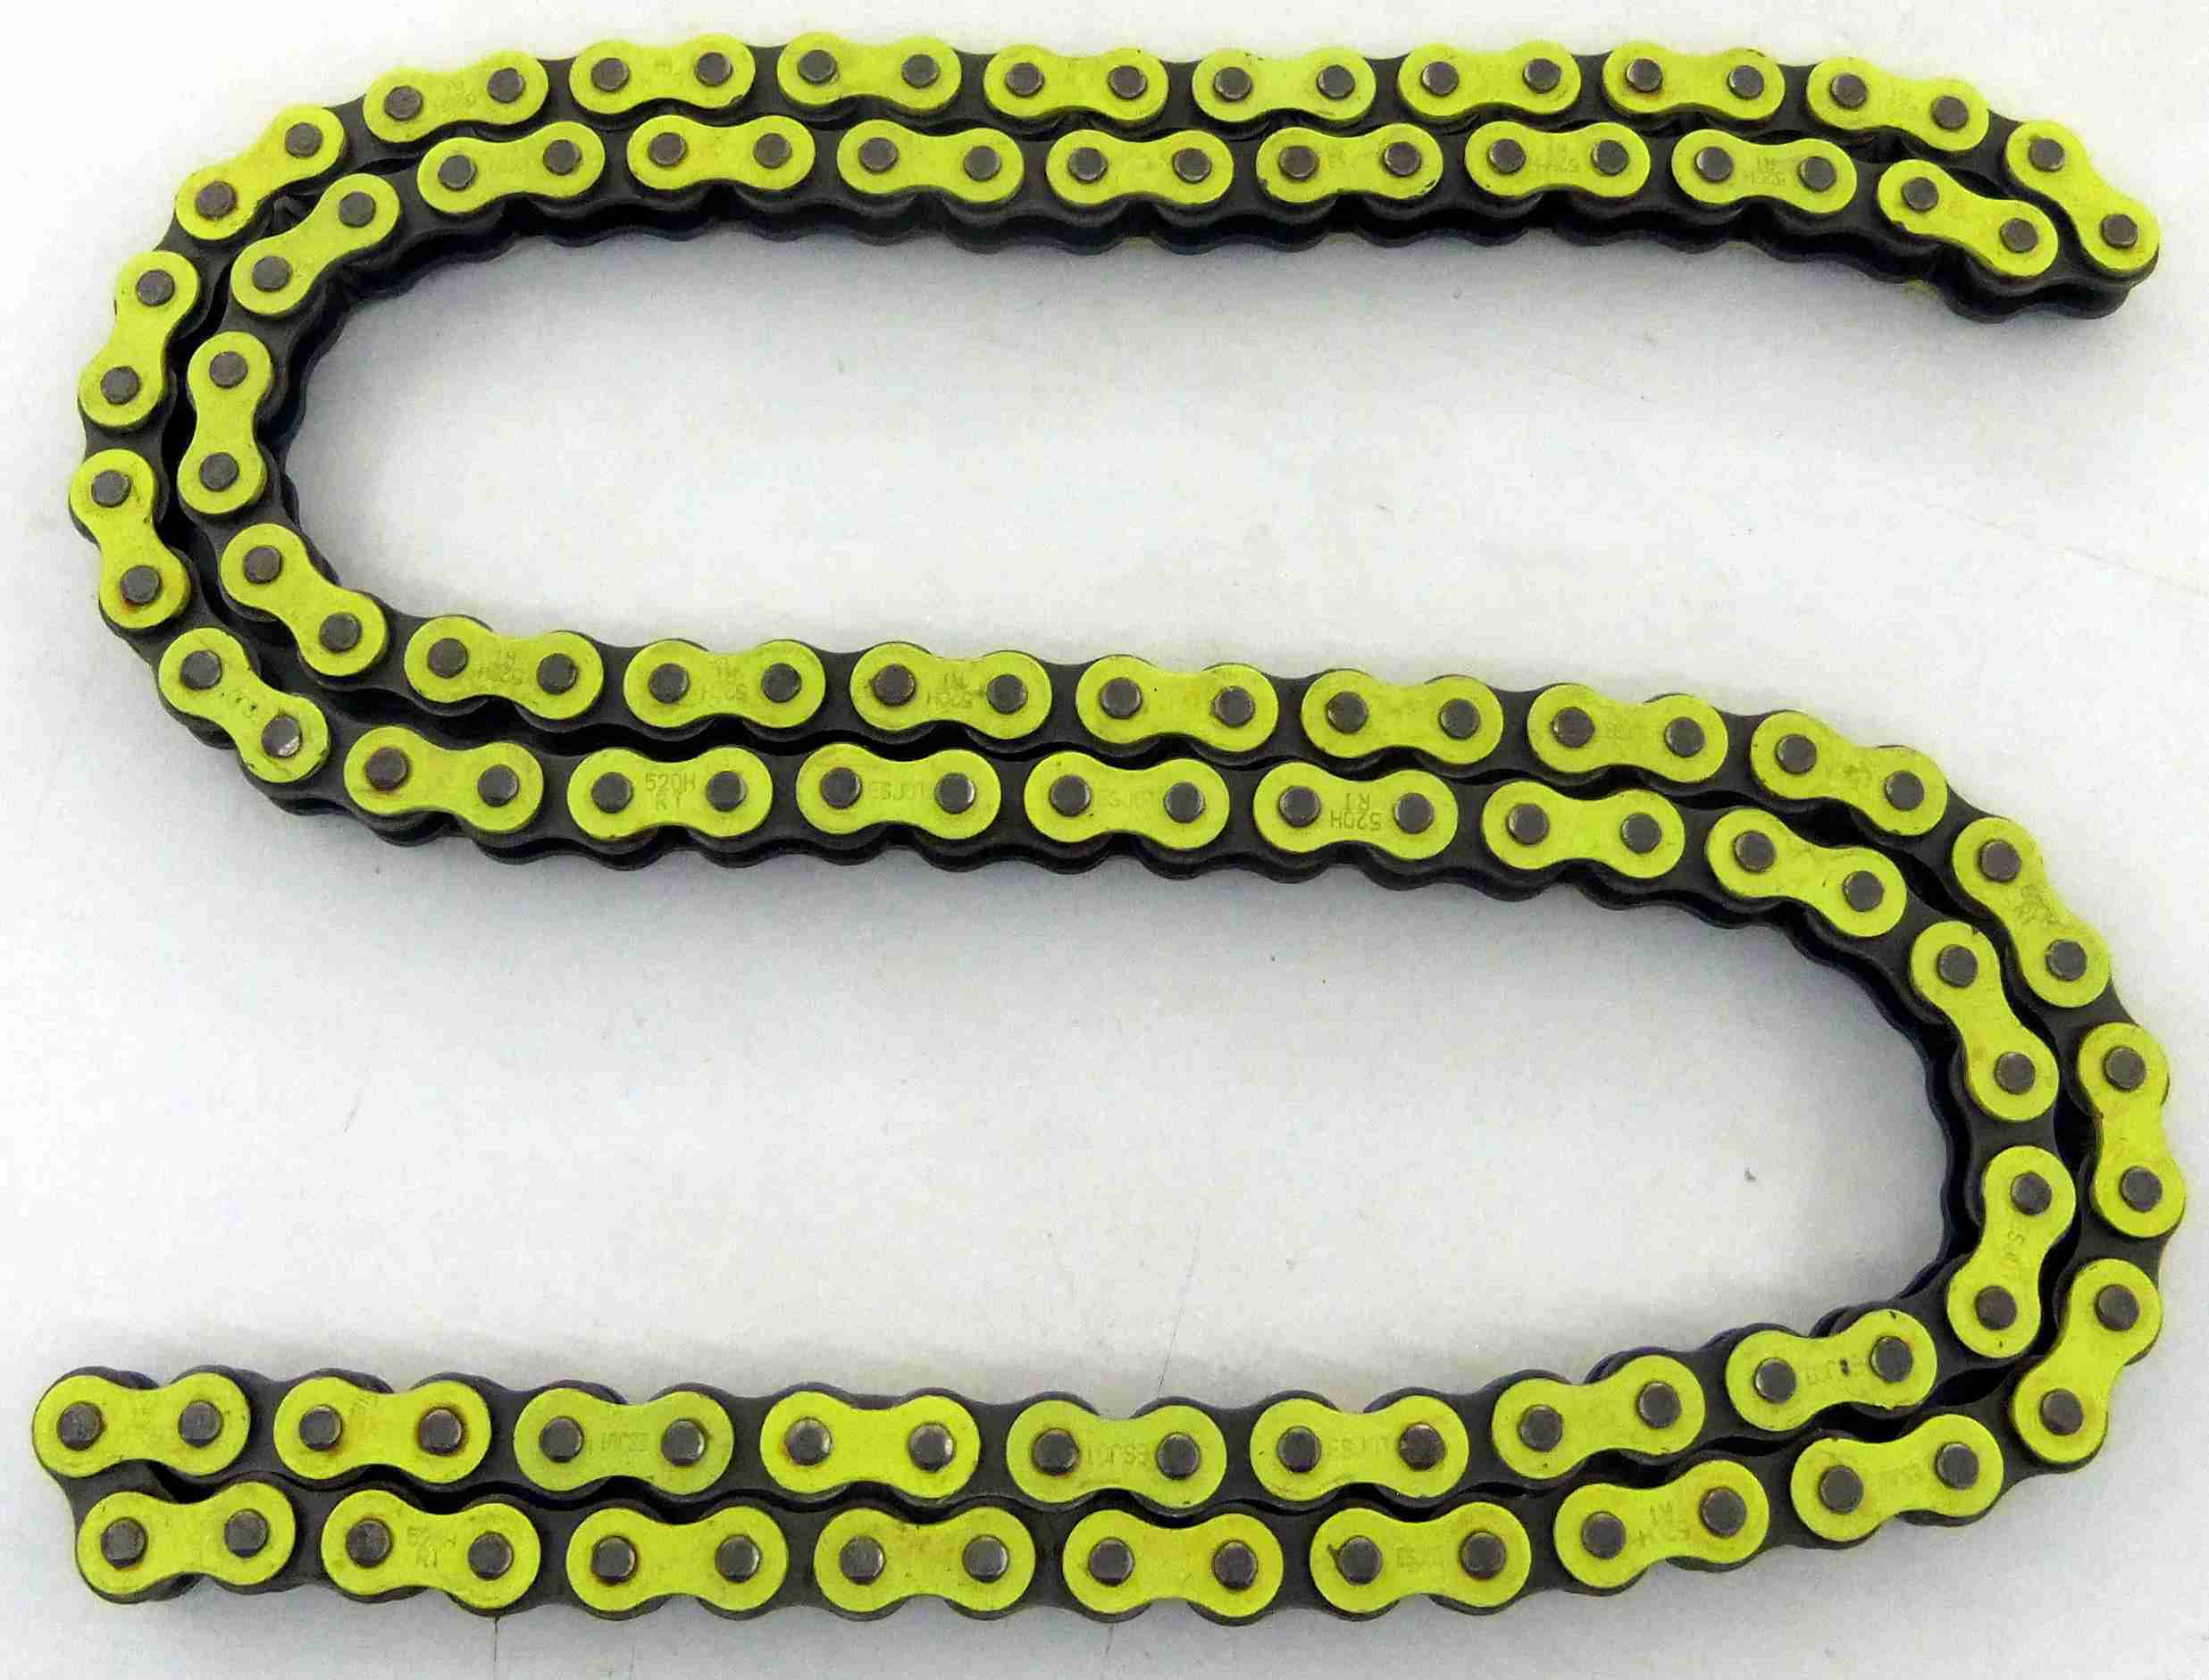 RK CHAIN 520MX YELLOW SUPER REINFORCED 120 LINKS/ROLLING